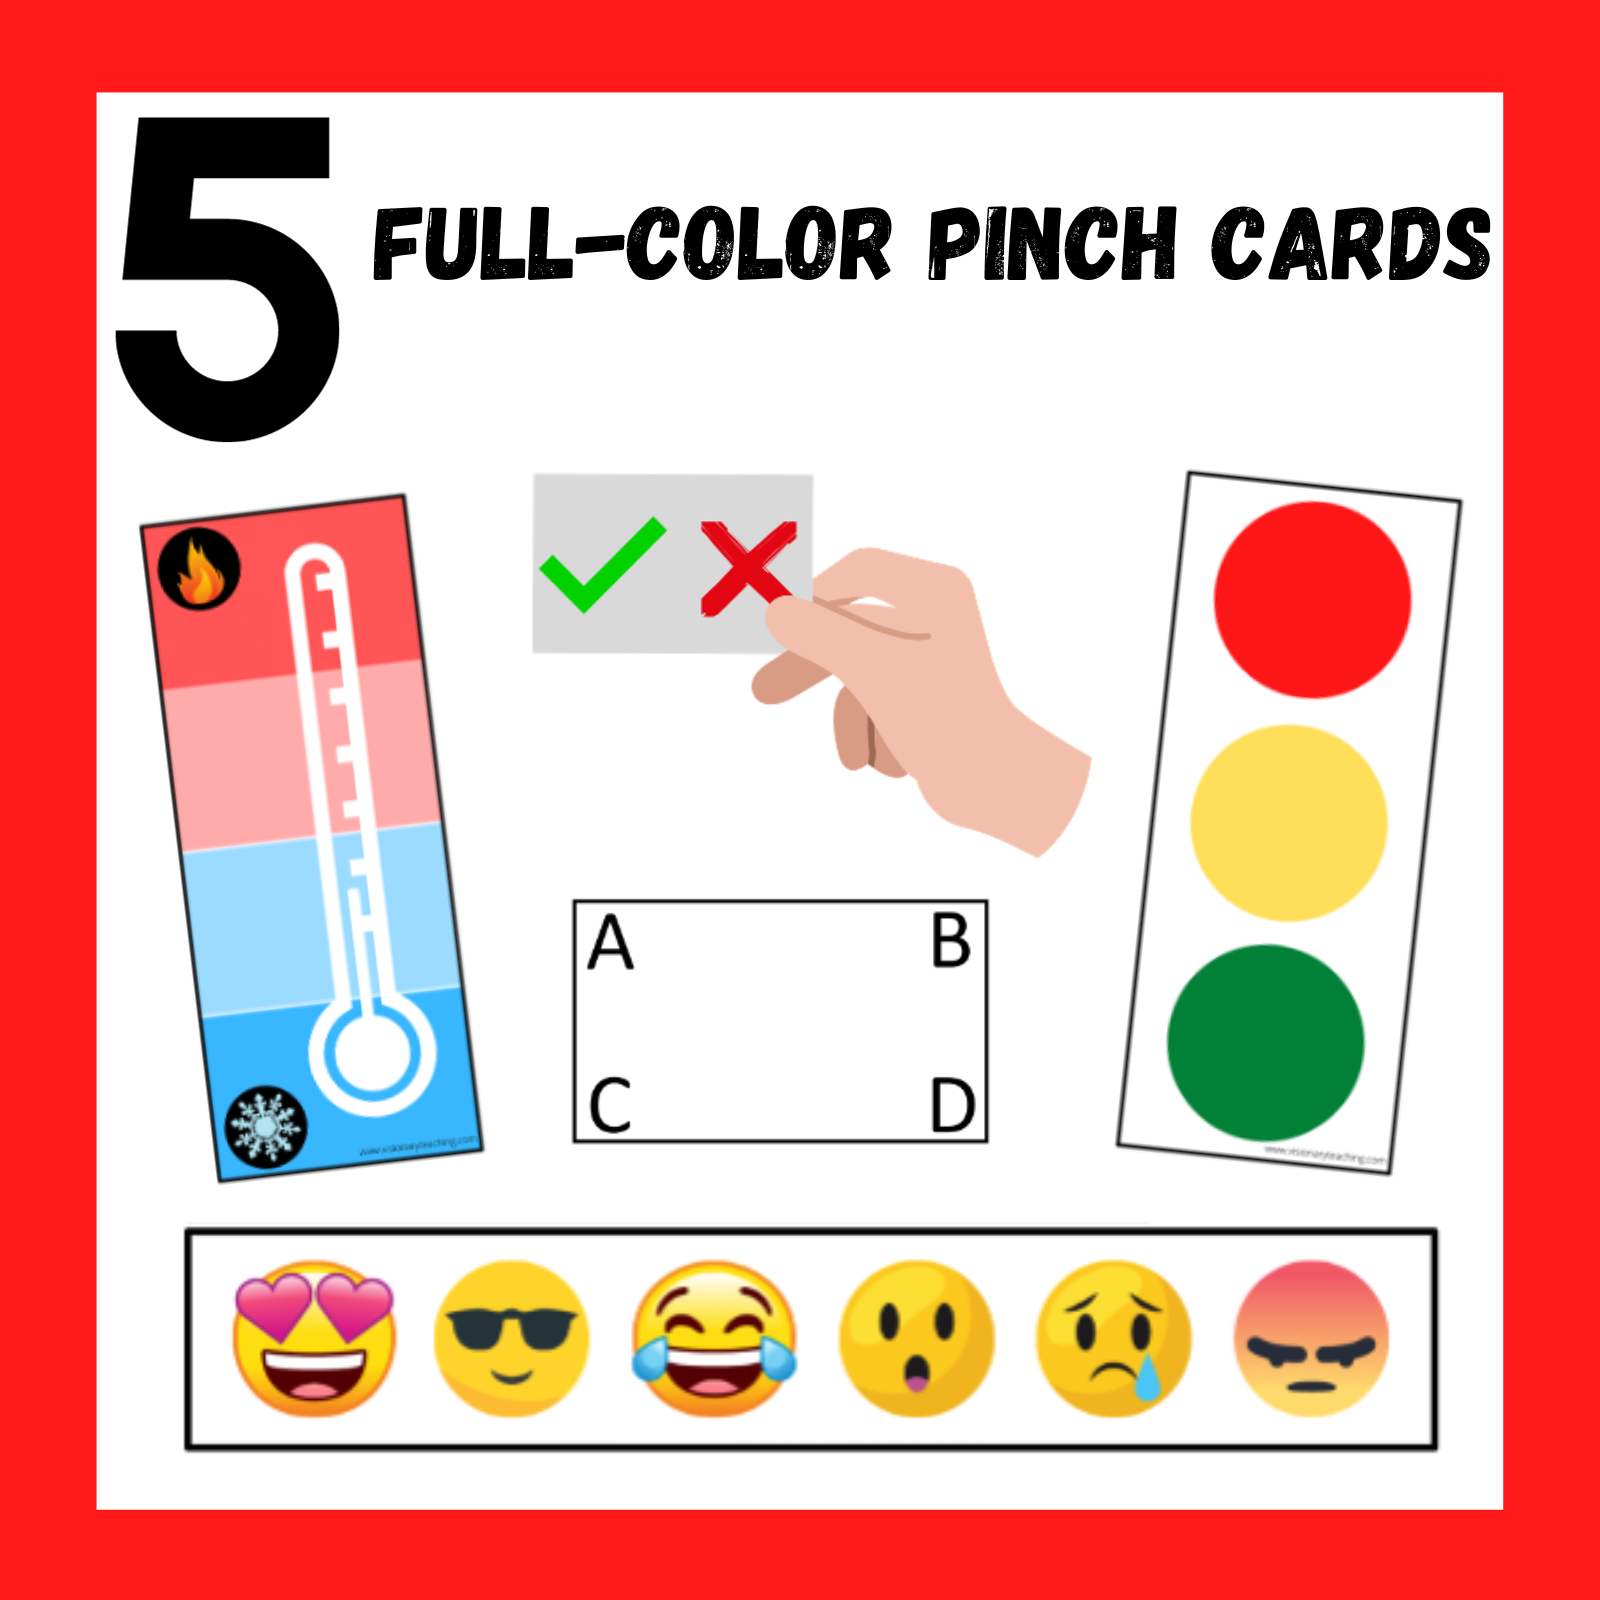 5 printable full color pinch cards plus a red background